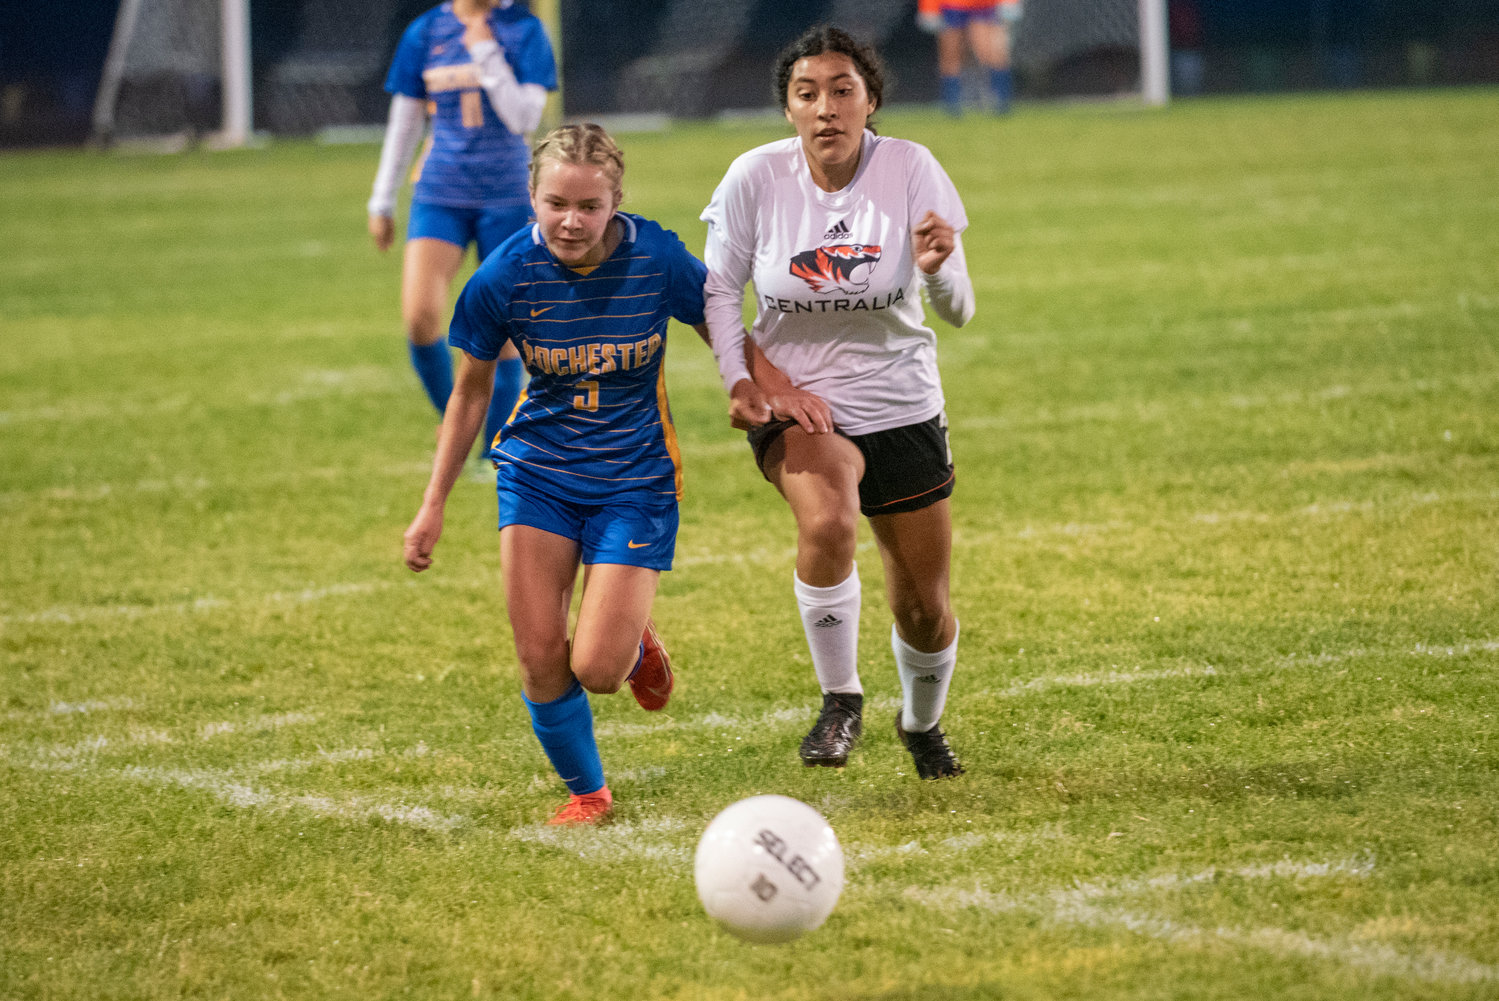 Rochester's Piper Quarnstrom (5) and Centralia's Isabelle Gruginski (2) race for a loose ball.